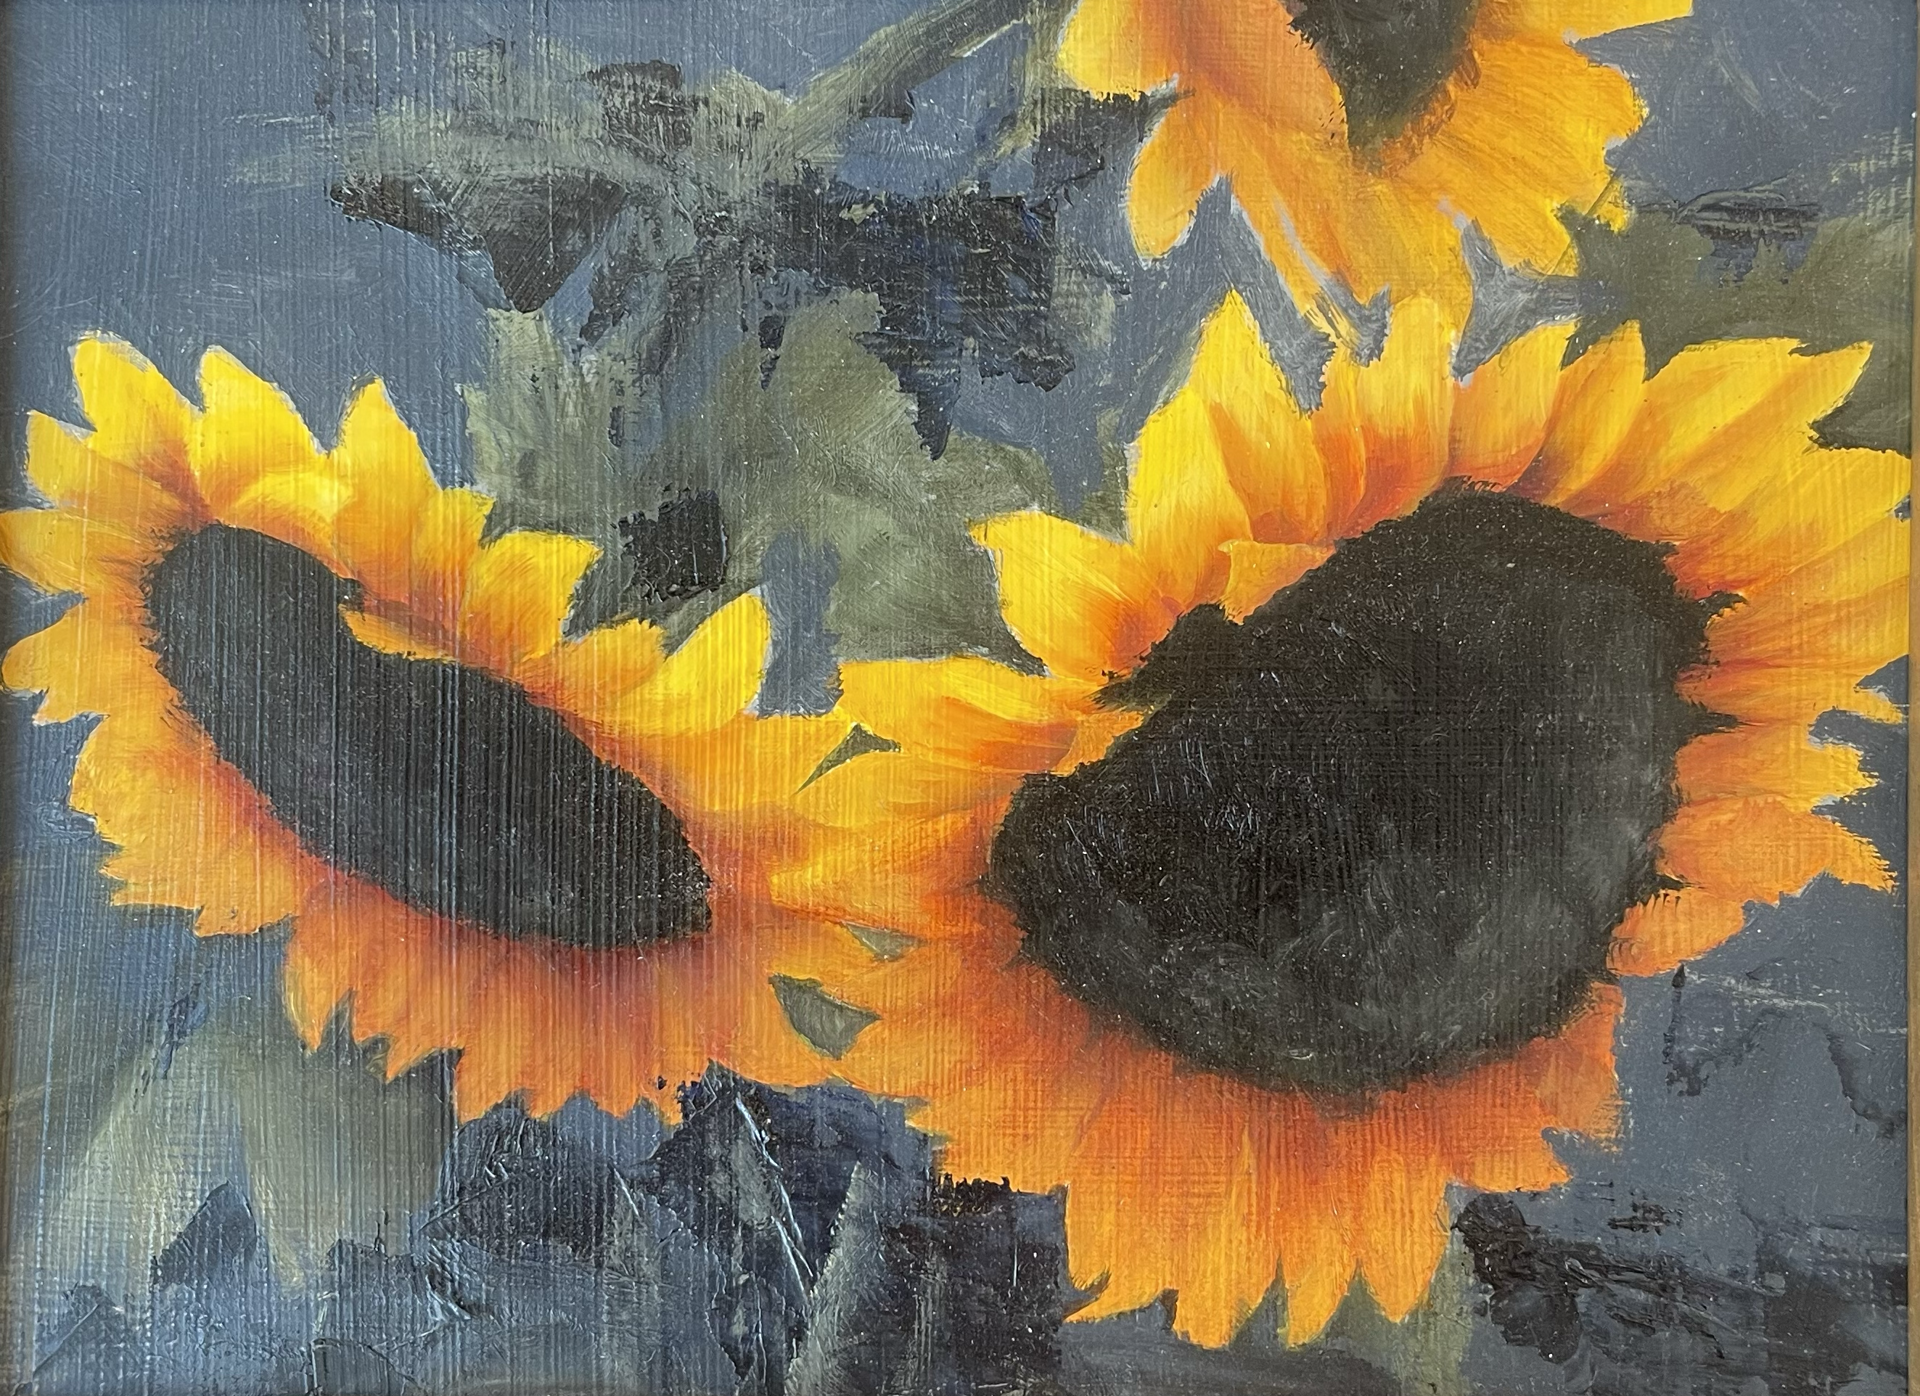 Sunflowers by Gregory Smith